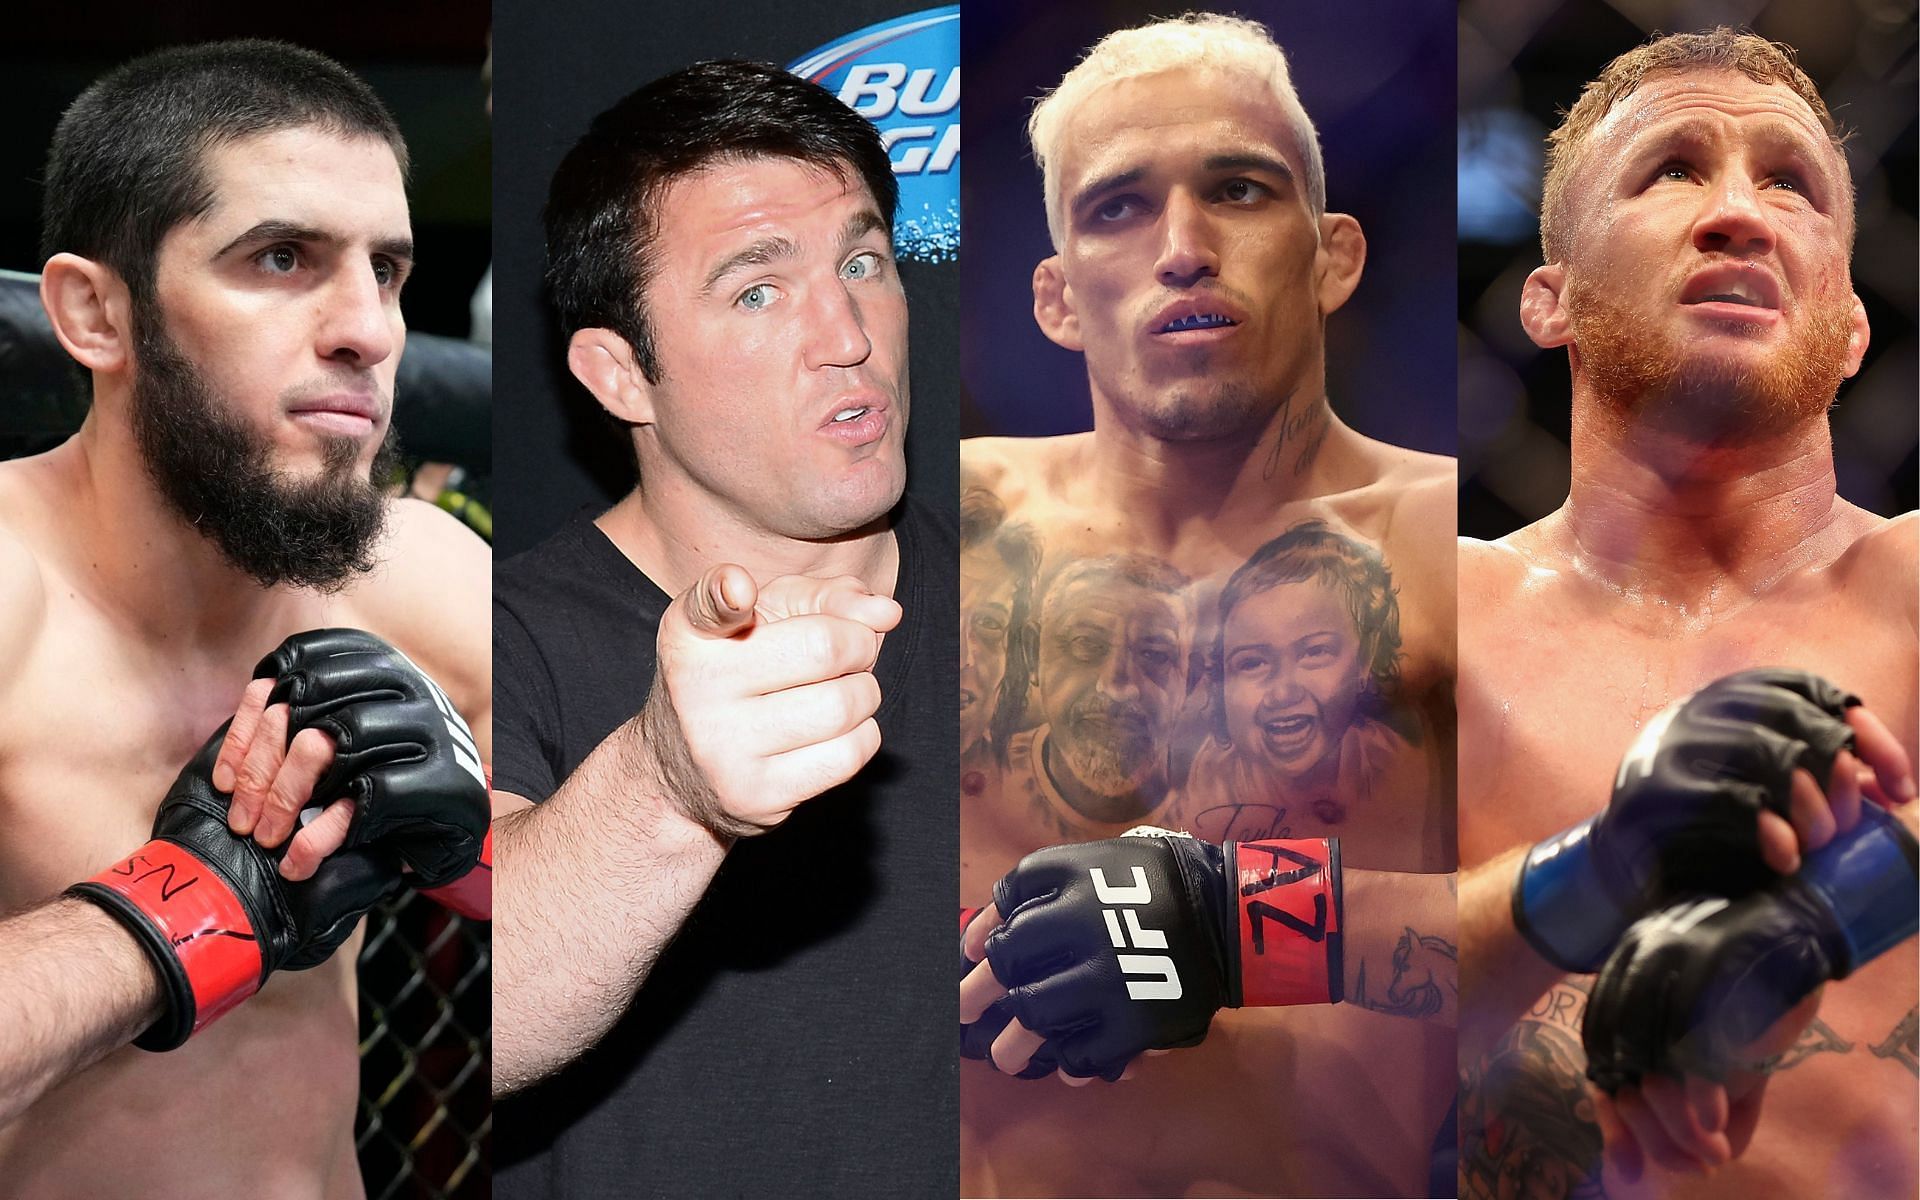 "The greats know what makes them tick" - Chael Sonnen says Charle...